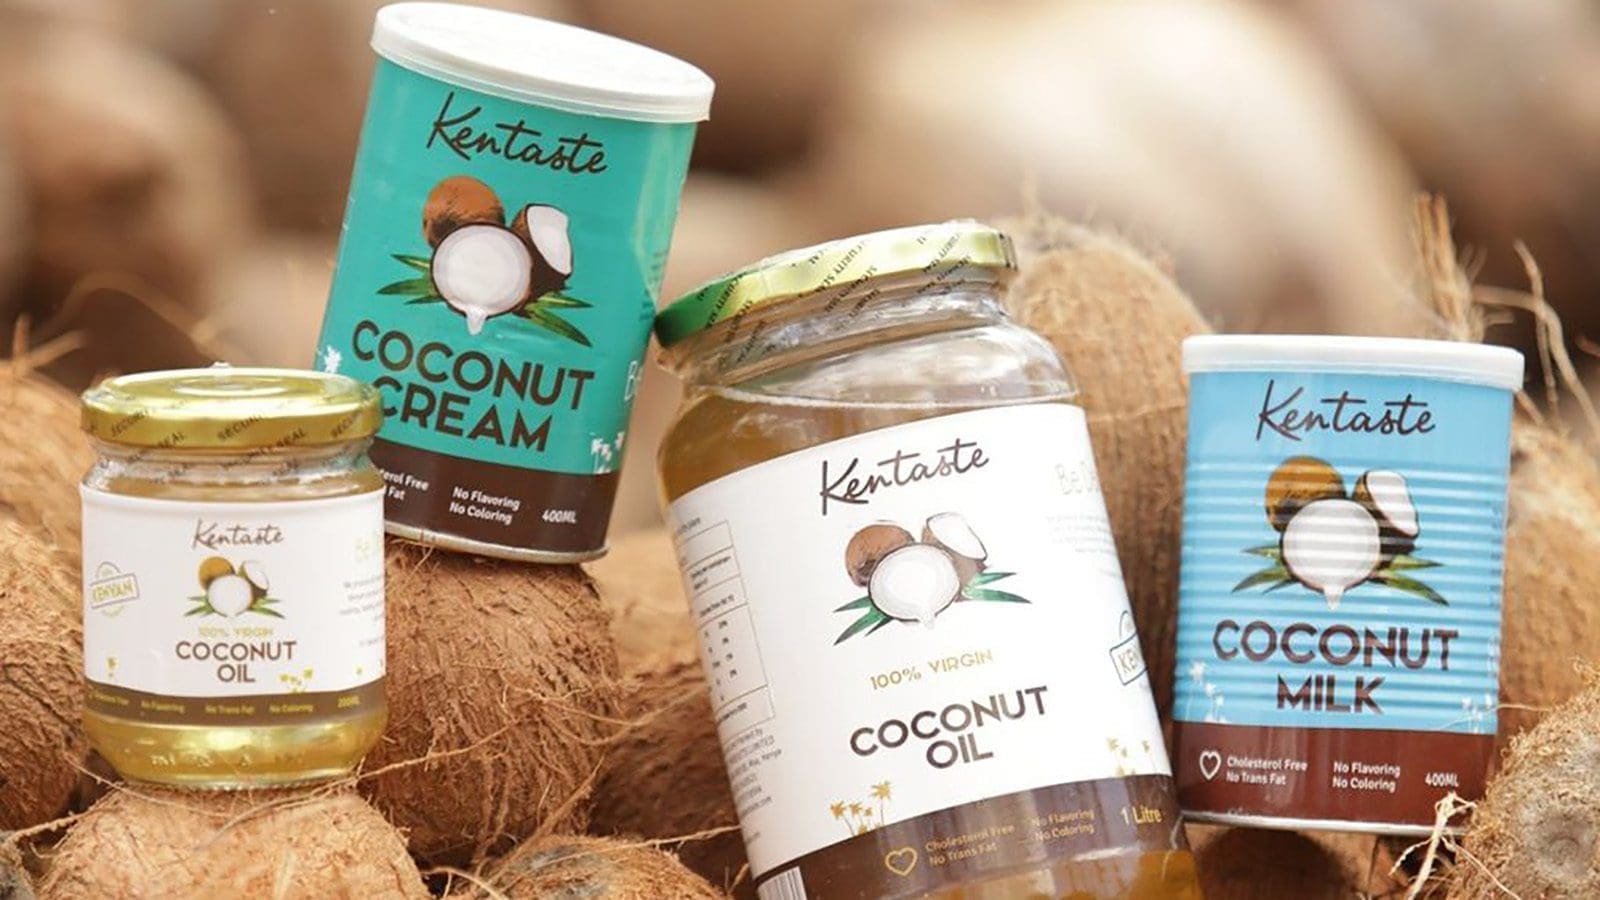 Kentaste, US agency partner to launch US$1.6M project catapulting firm into US nut market